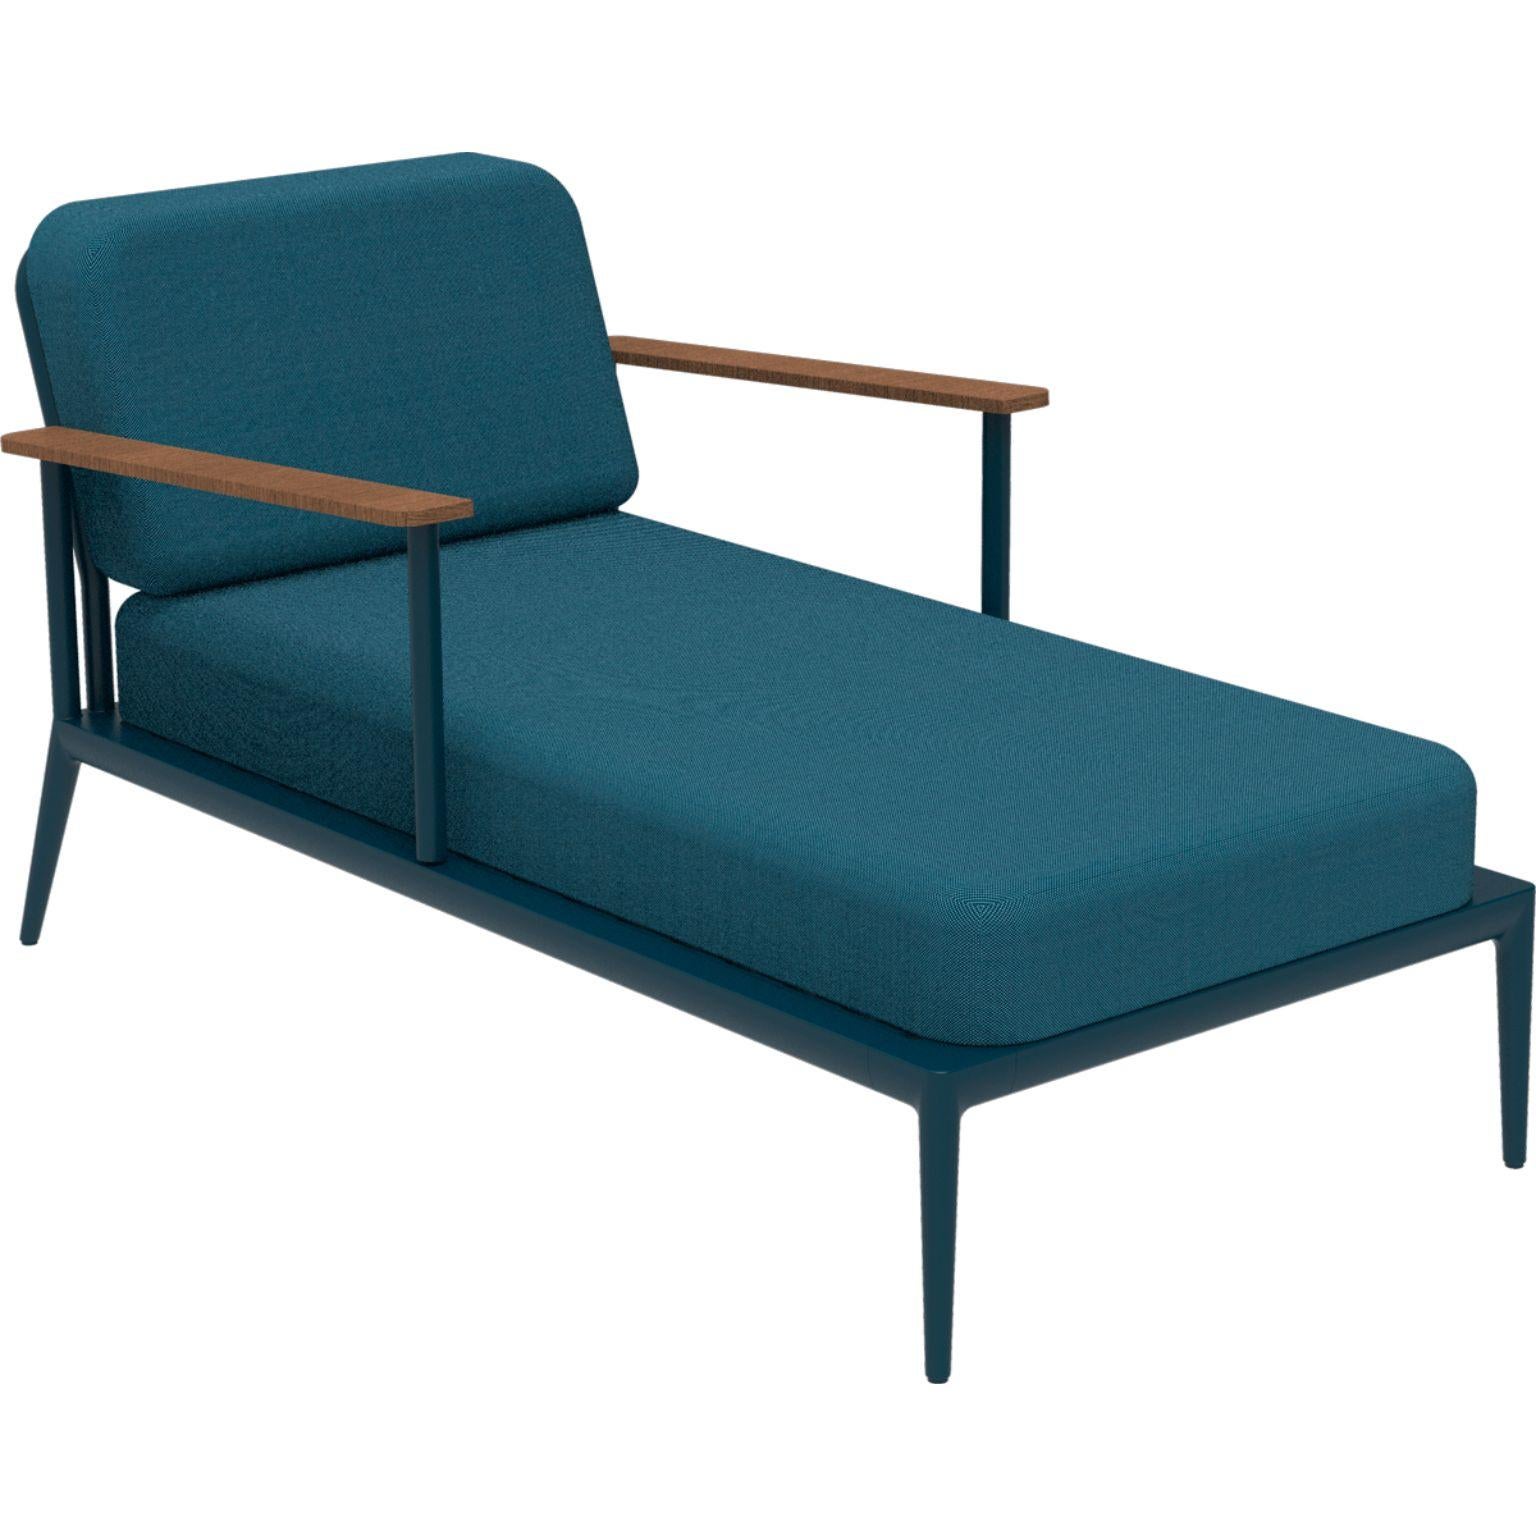 Nature Navy Divan by MOWEE
Dimensions: D155 x W83 x H81 cm (seat height 42 cm).
Material: Aluminum, upholstery and Iroko wood.
Weight: 30 kg.
Also available in different colors and finishes. Please contact us.

An unmistakable collection for